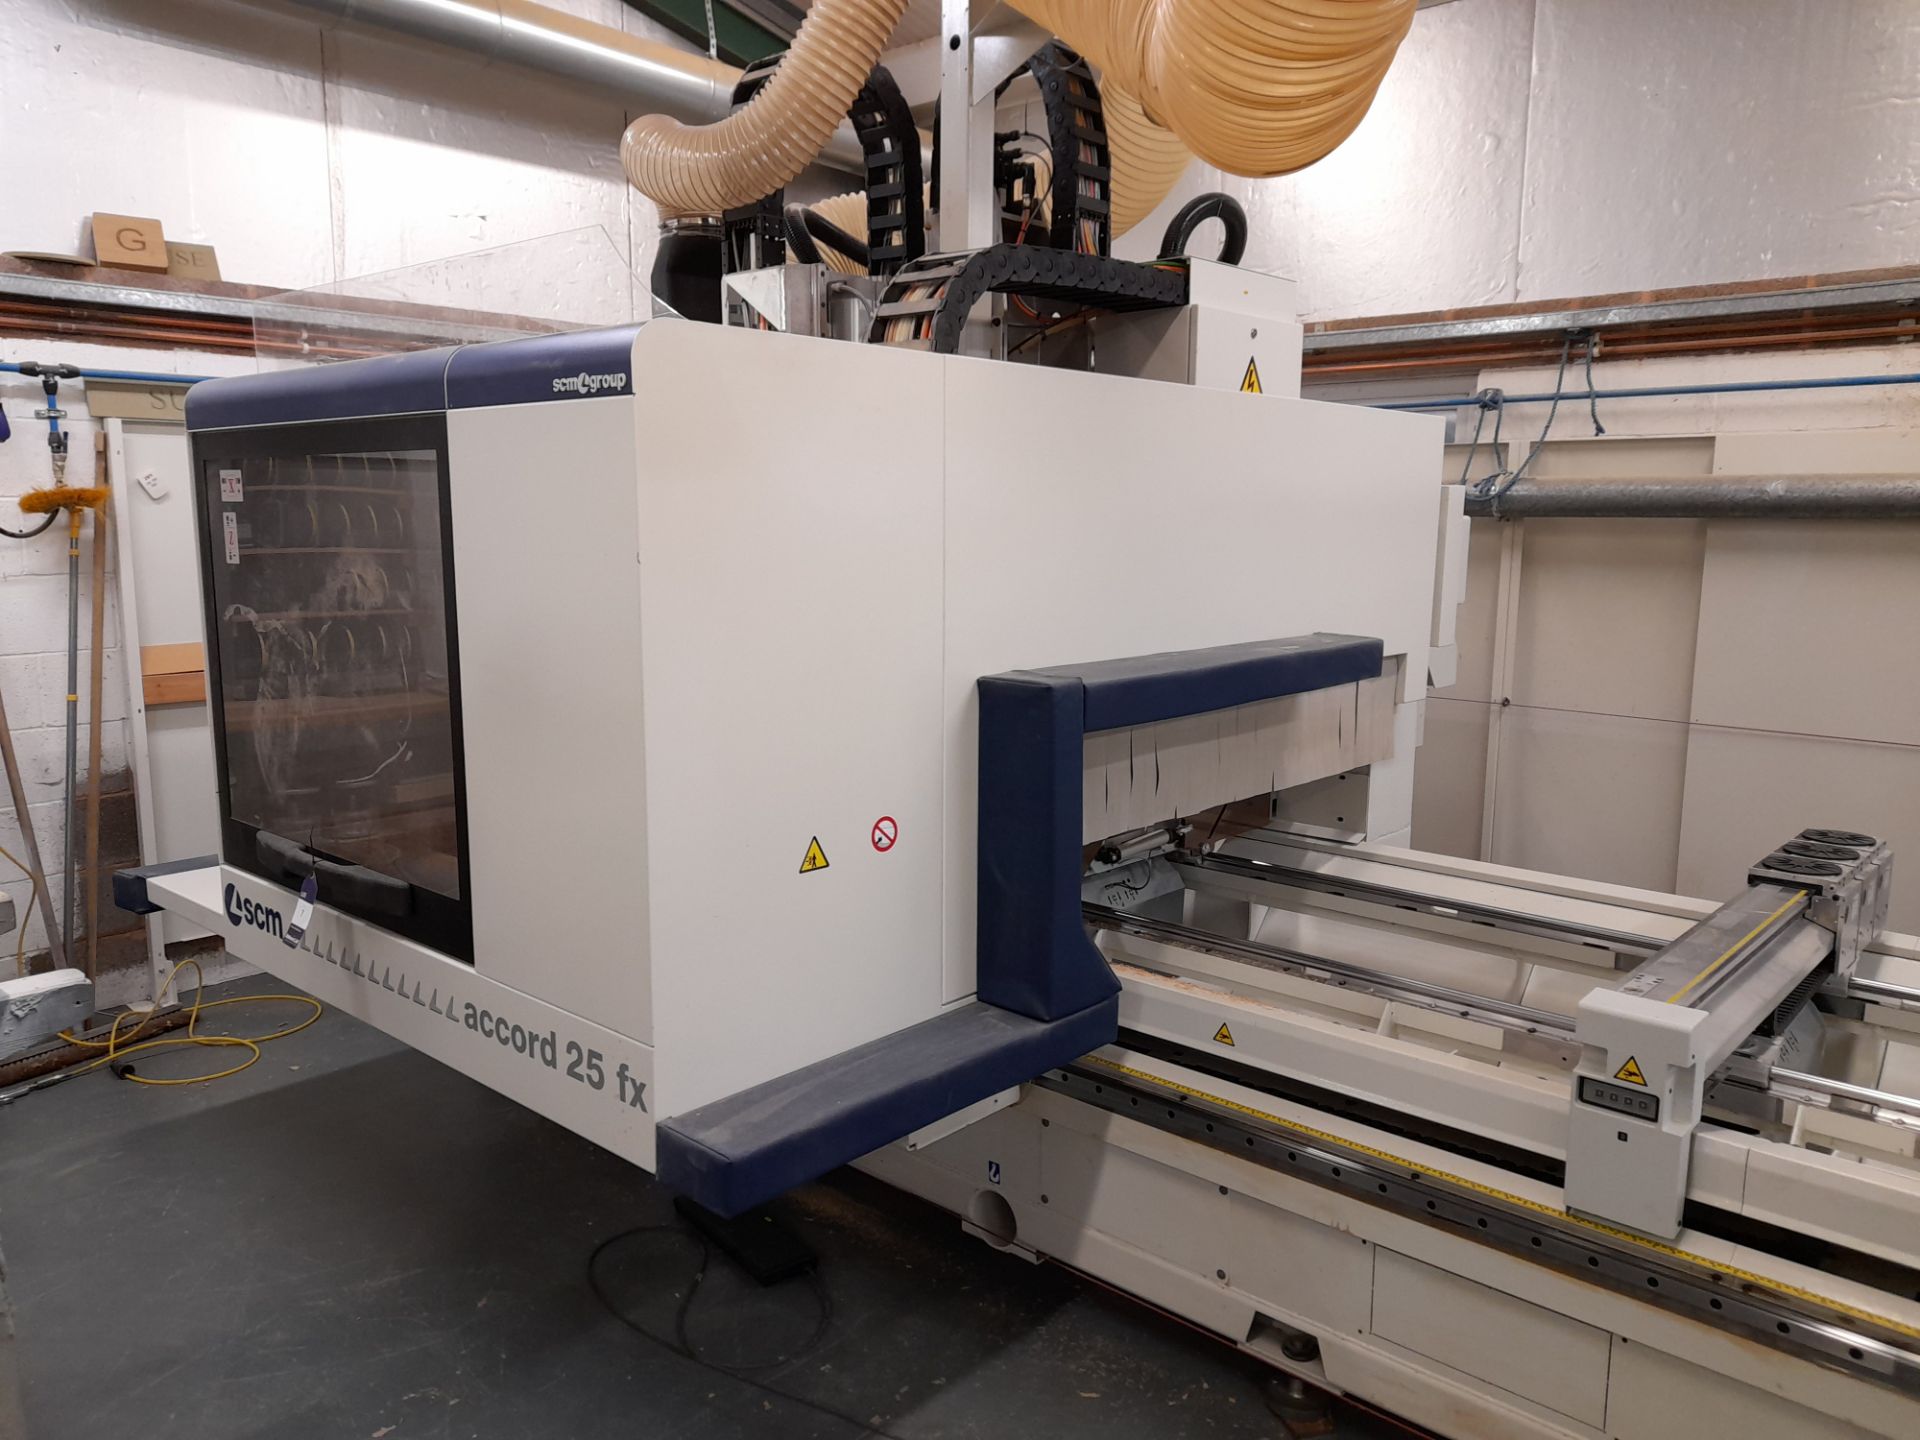 SCM Accord 25fx CNC Machining Centre, fully automated borer & router, Serial Number AA2/004141, - Image 29 of 43